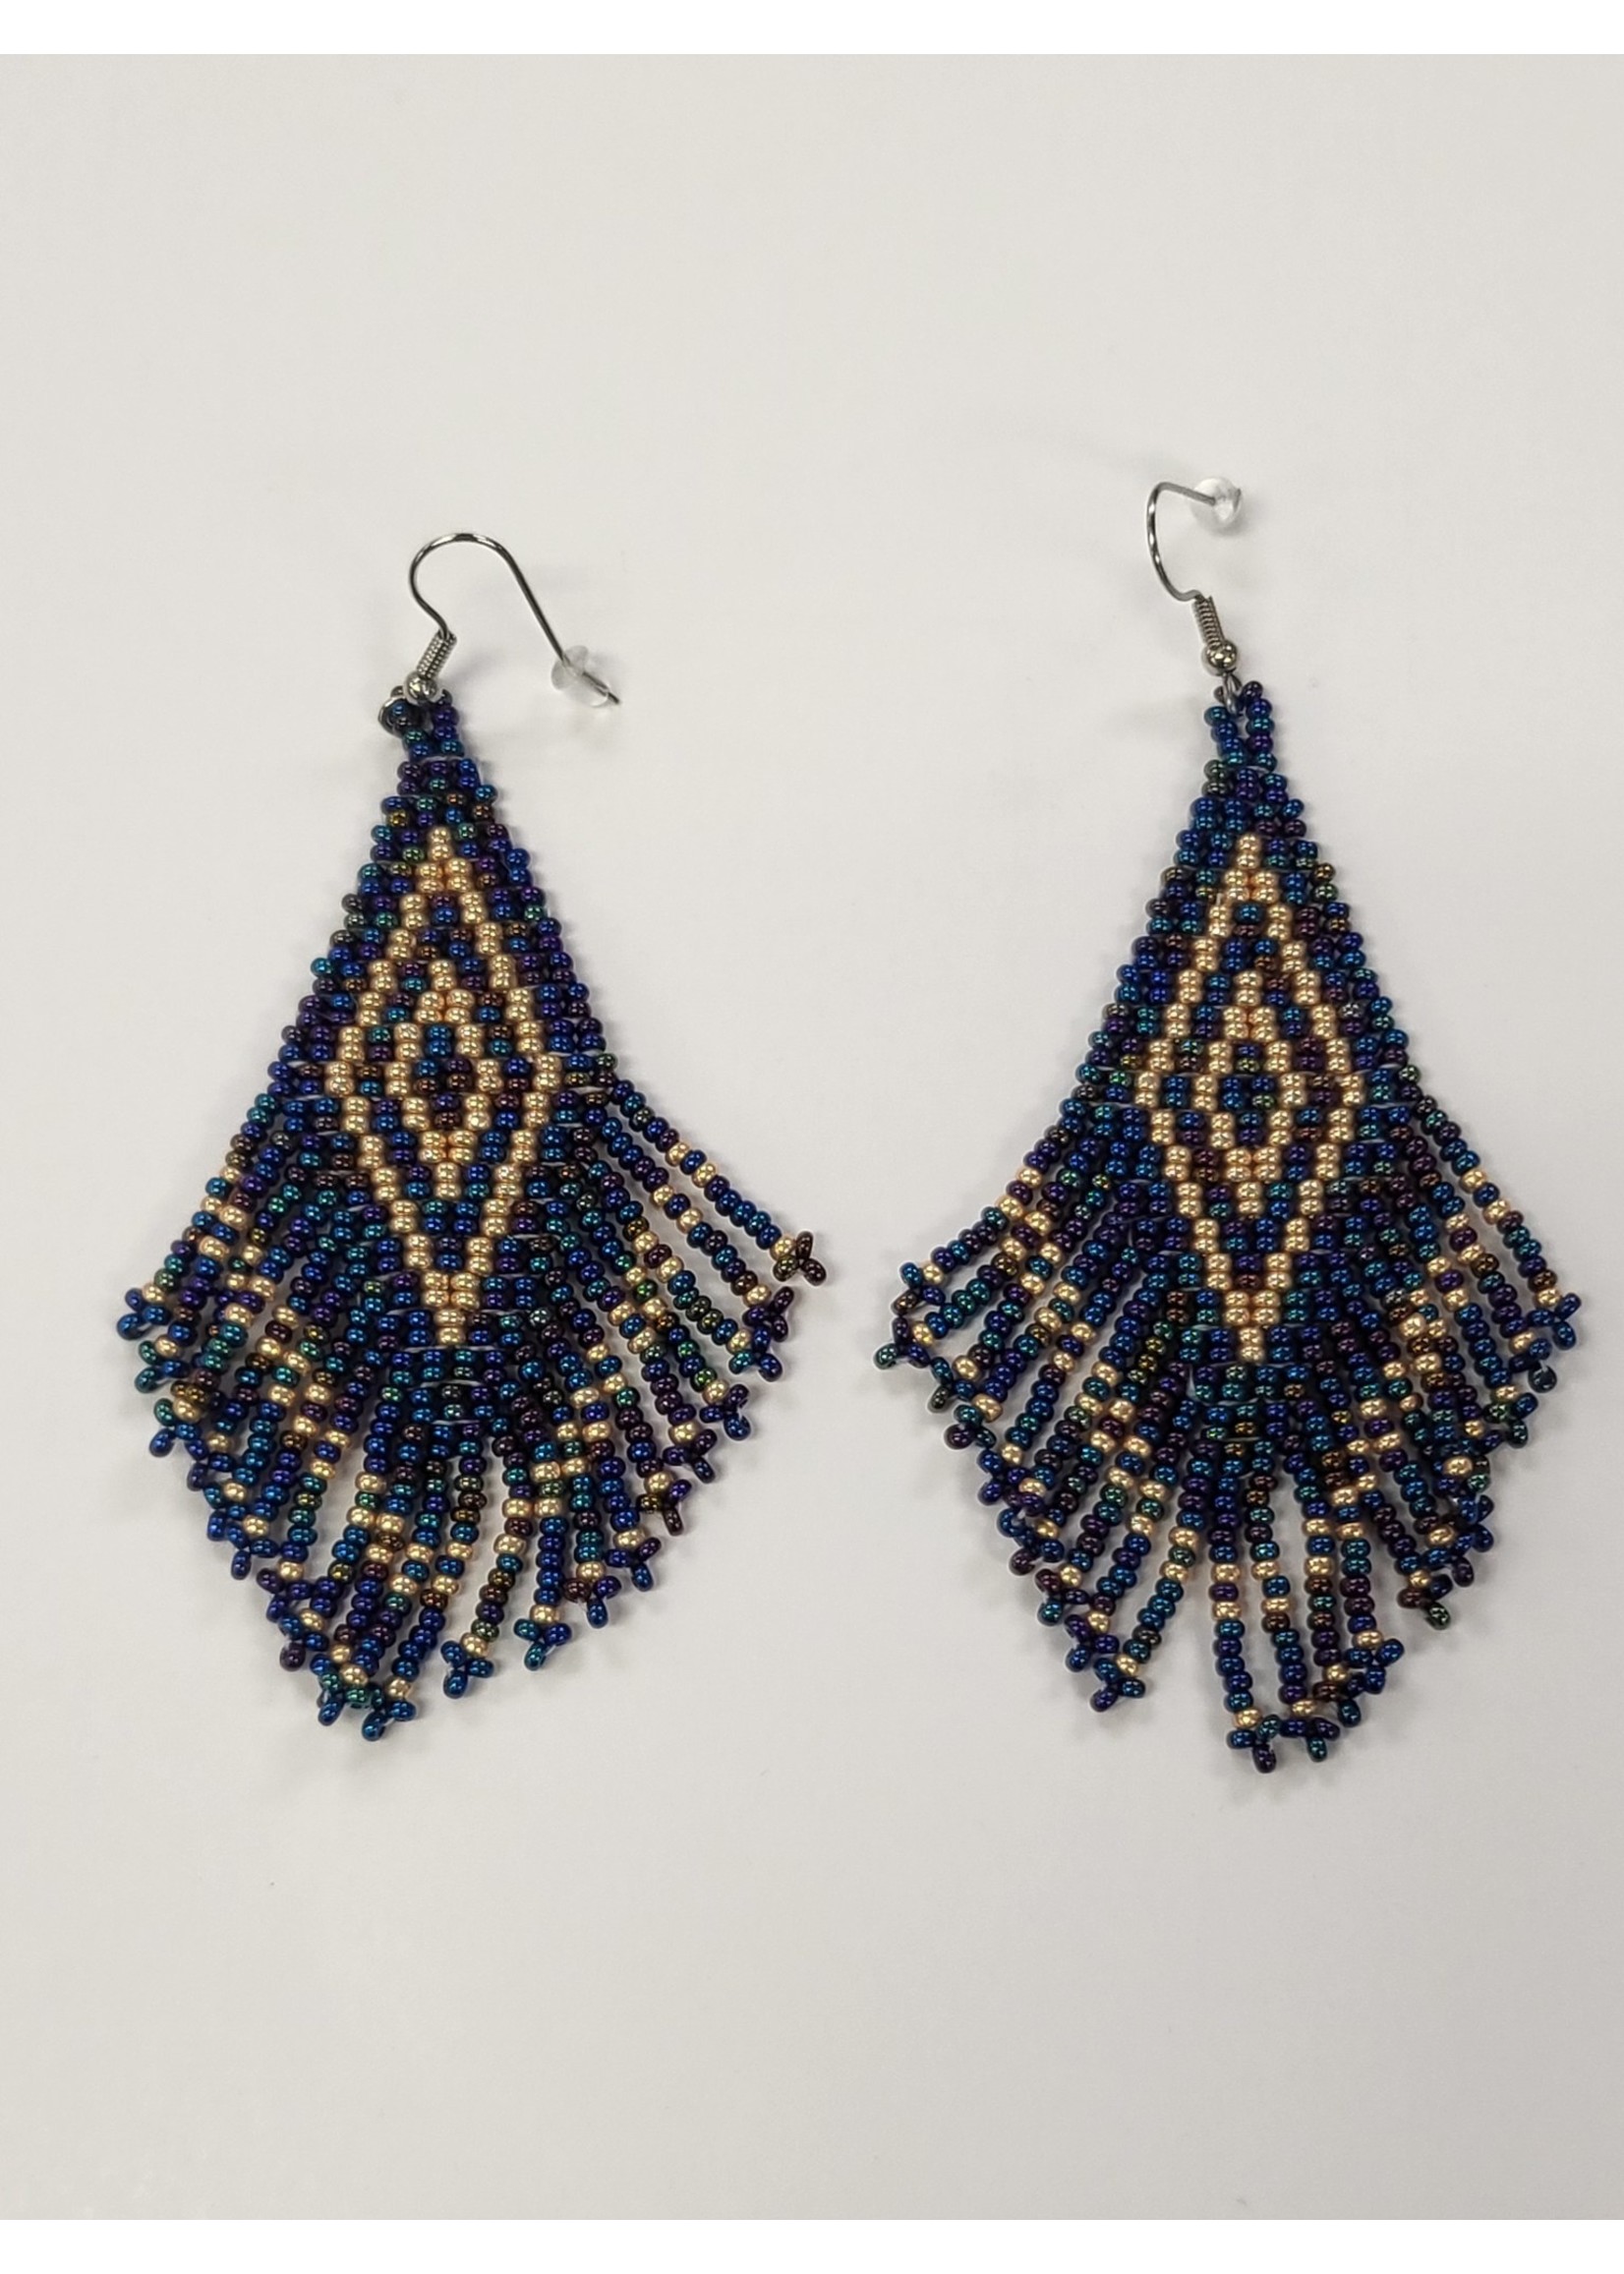 Beaded Earring Gasoline & Gold Diamond with Fringe (SOLD)